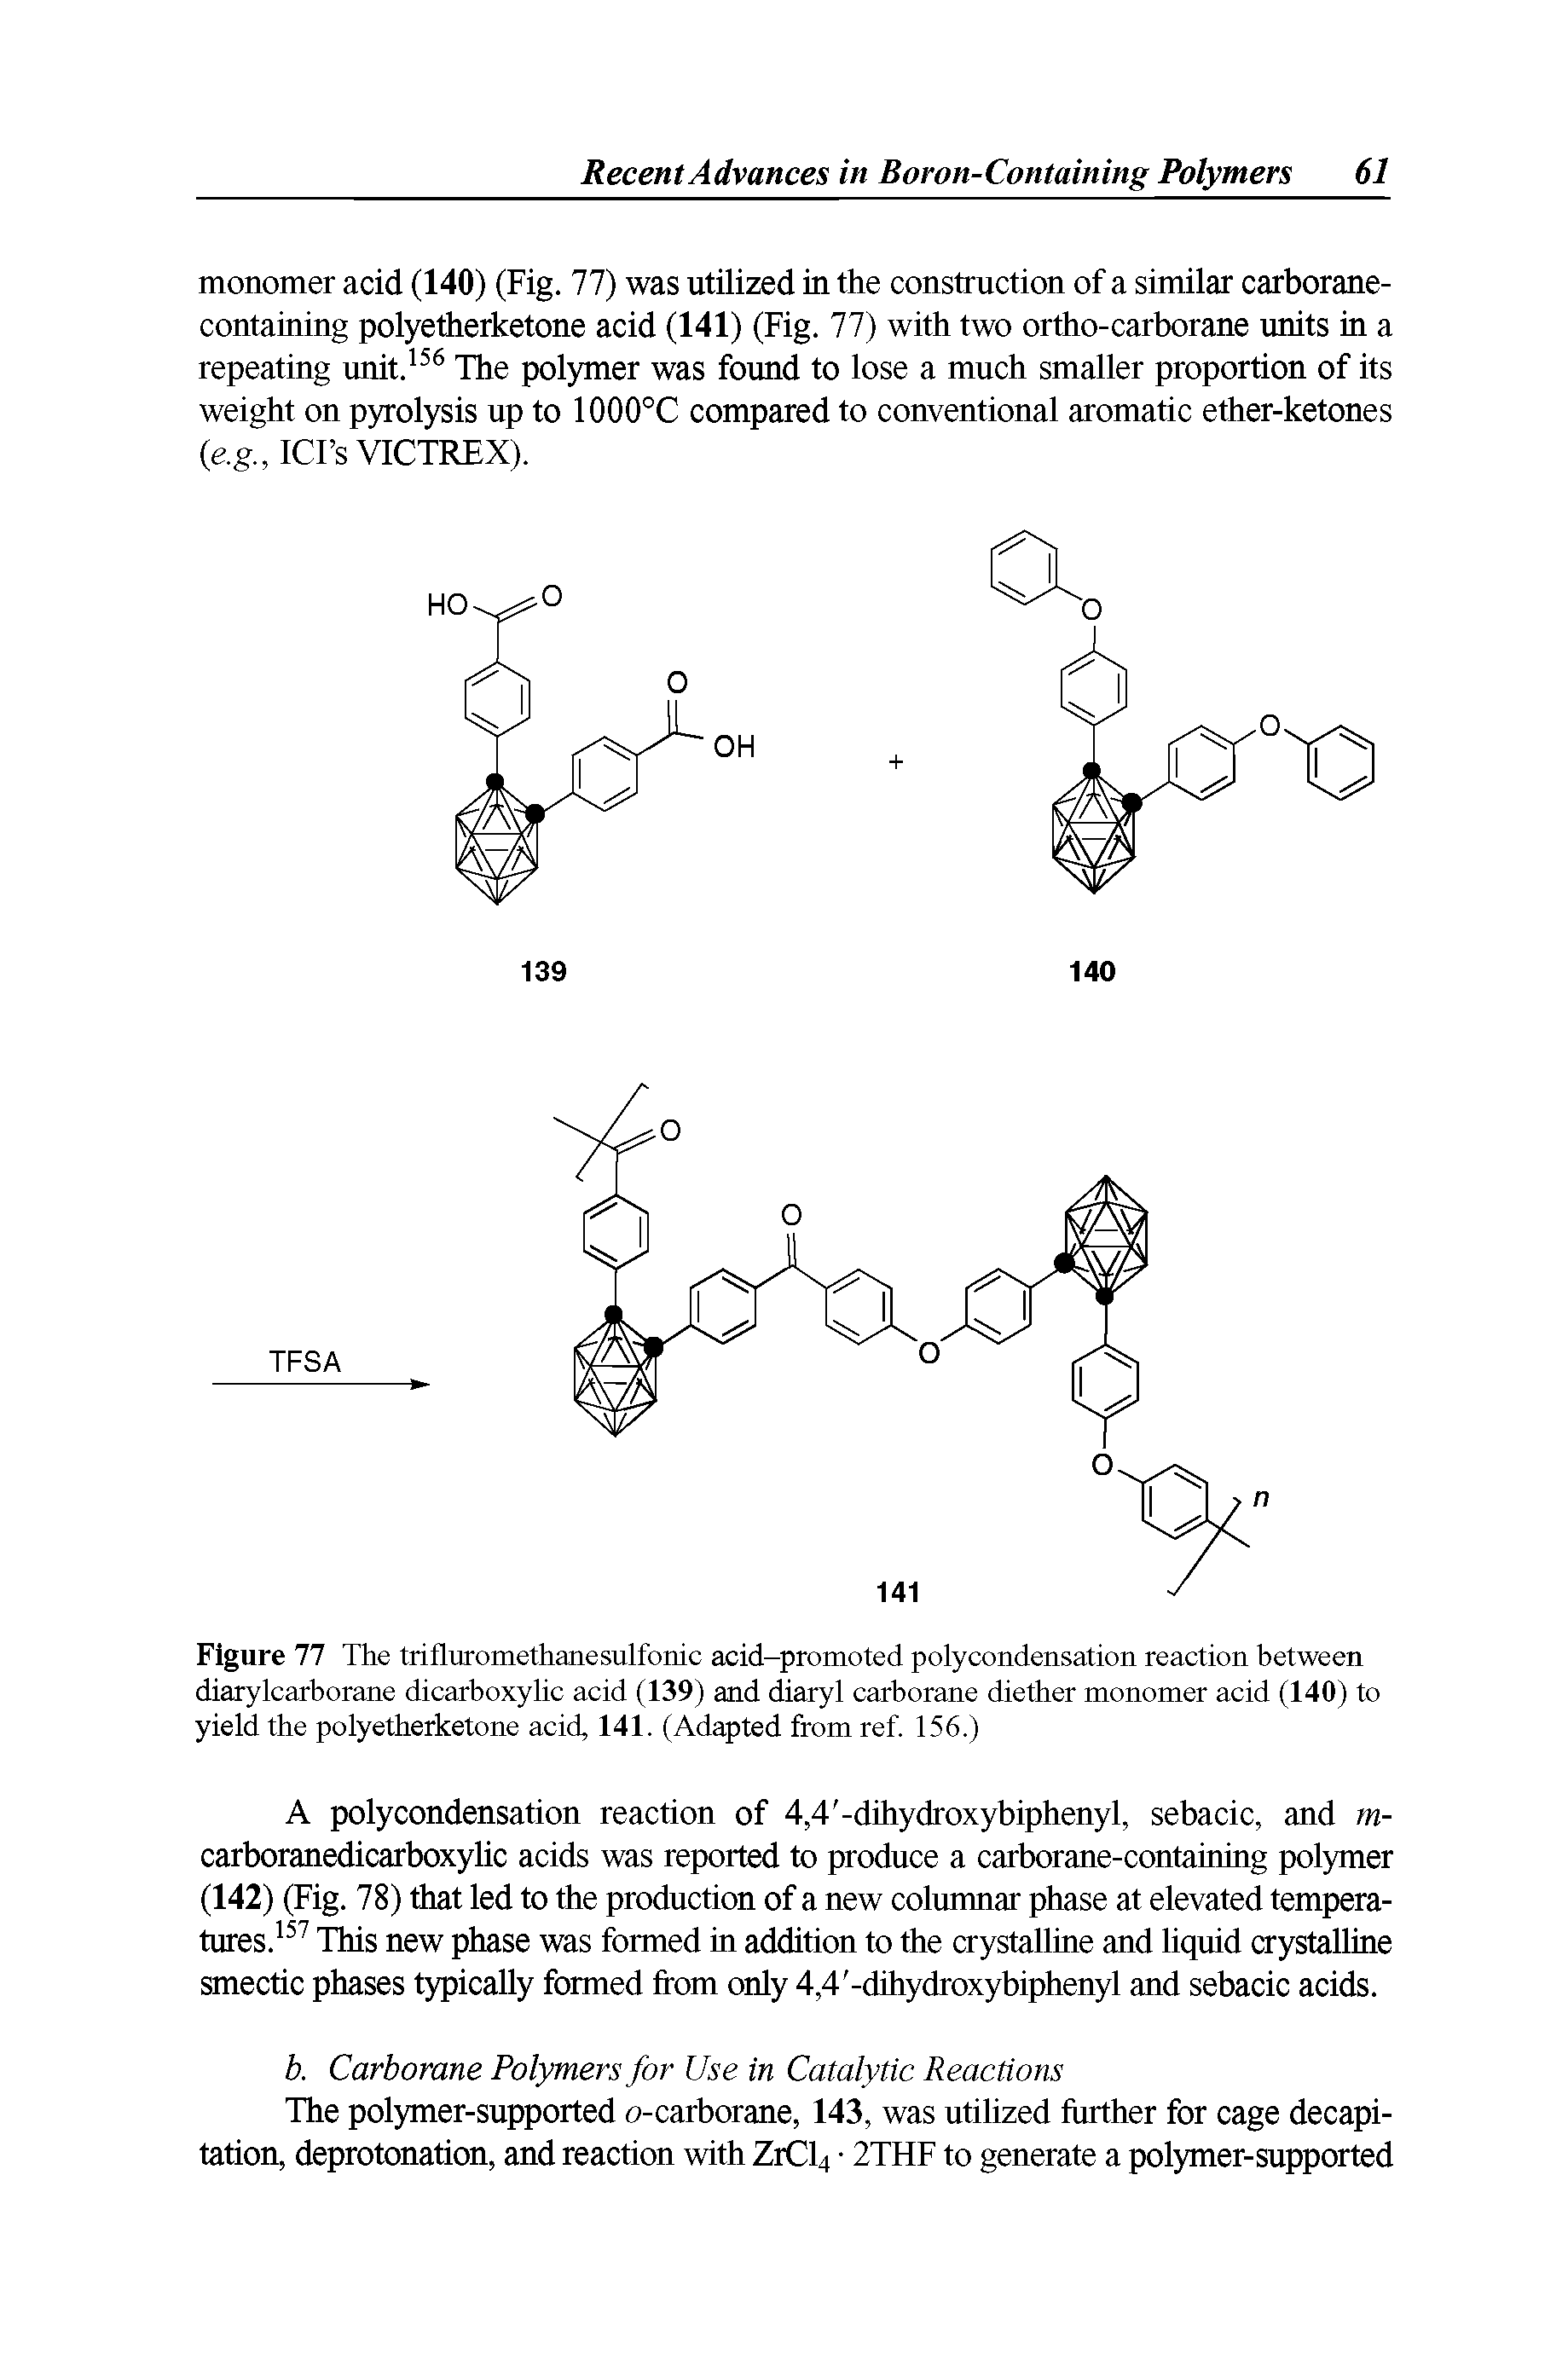 Figure 77 The trifluromethanesulfonic acid-promoted polycondensation reaction between diarylcarborane dicarboxylic acid (139) and diaryl carborane diether monomer acid (140) to yield the polyetherketone acid, 141. (Adapted from ref. 156.)...